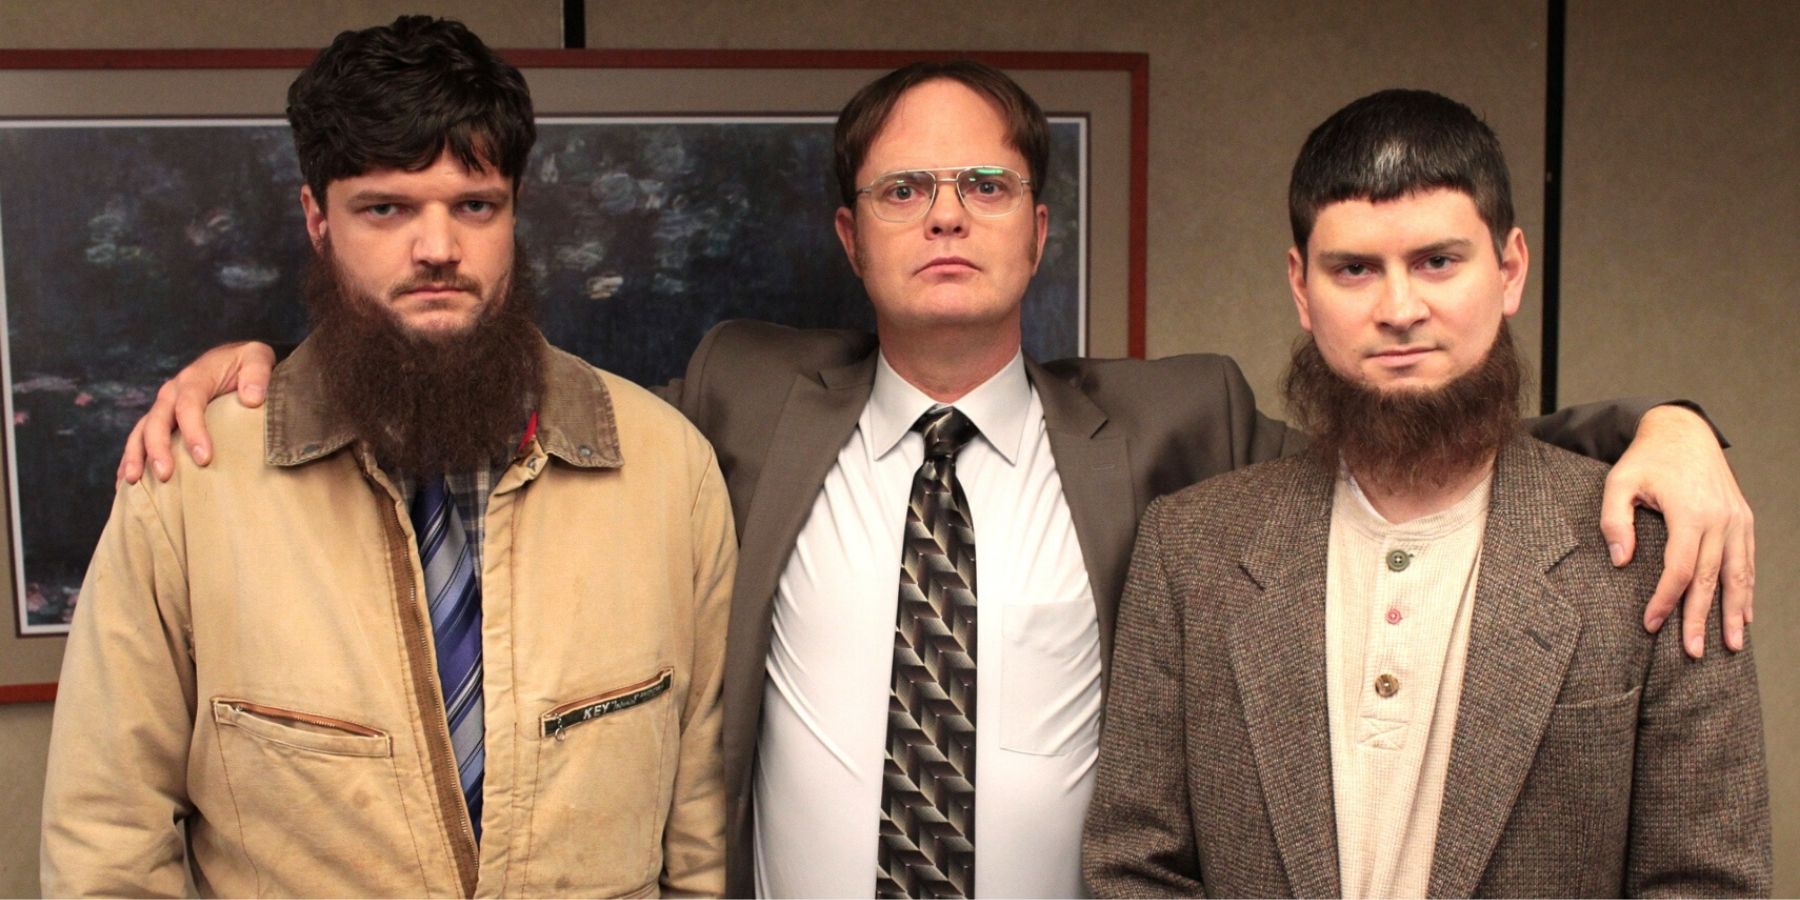 Dwight with his friends on The Office